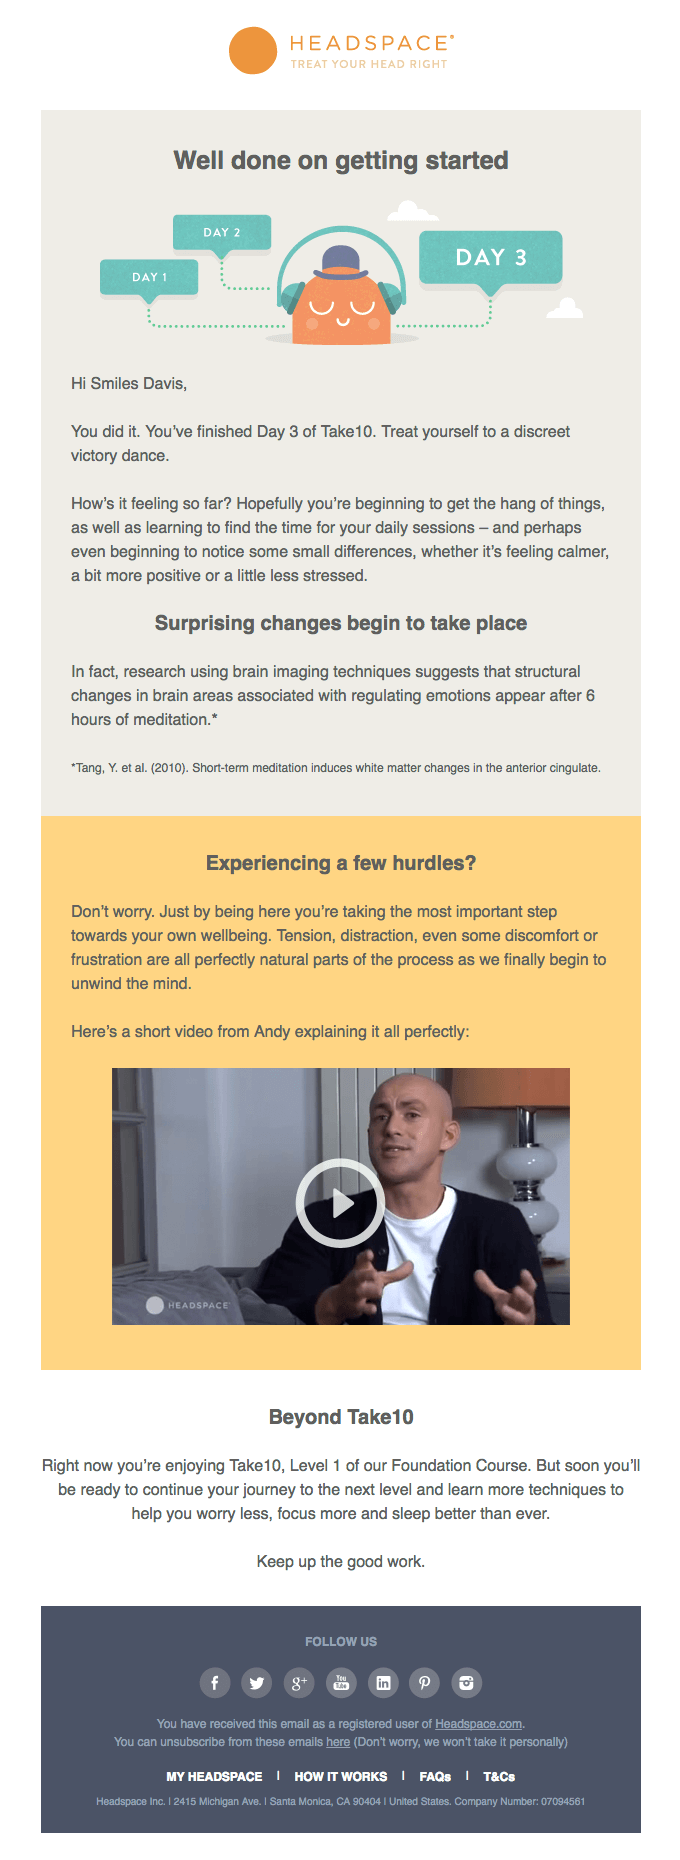 Behavioral email from Headspace containing educational content.